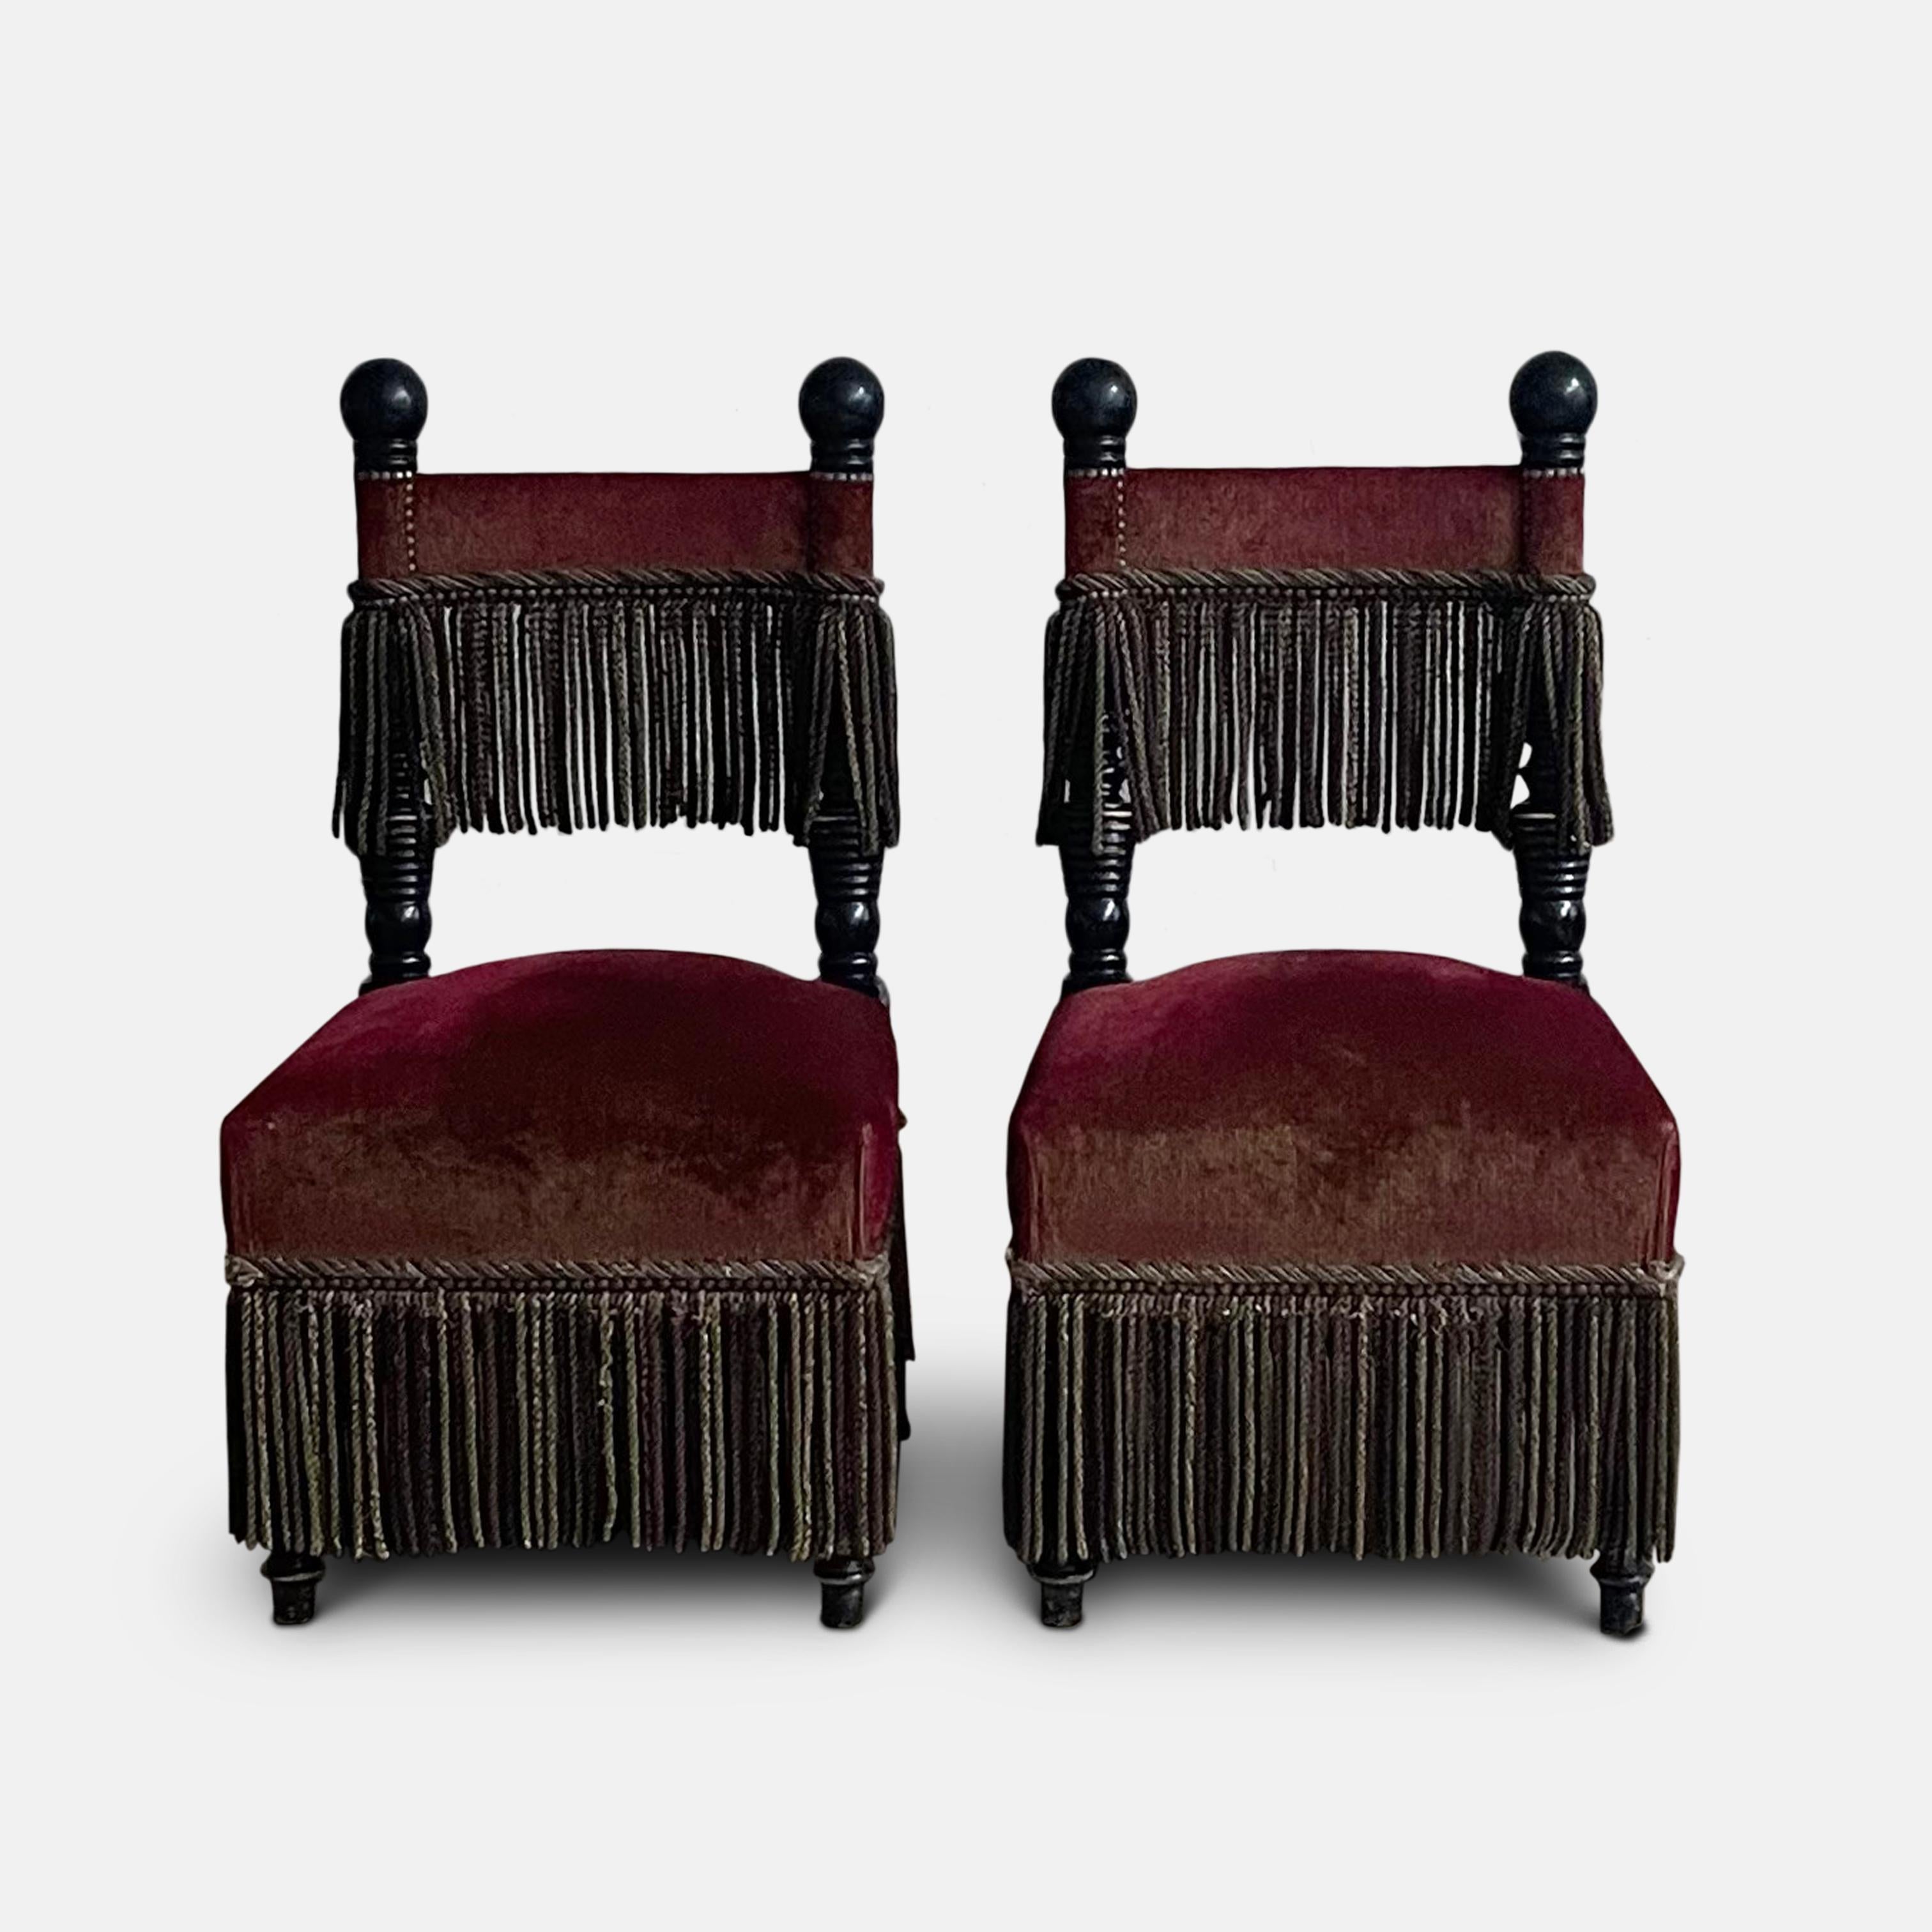 French Fringed Chairs From Ladurée Patisserie For Sale